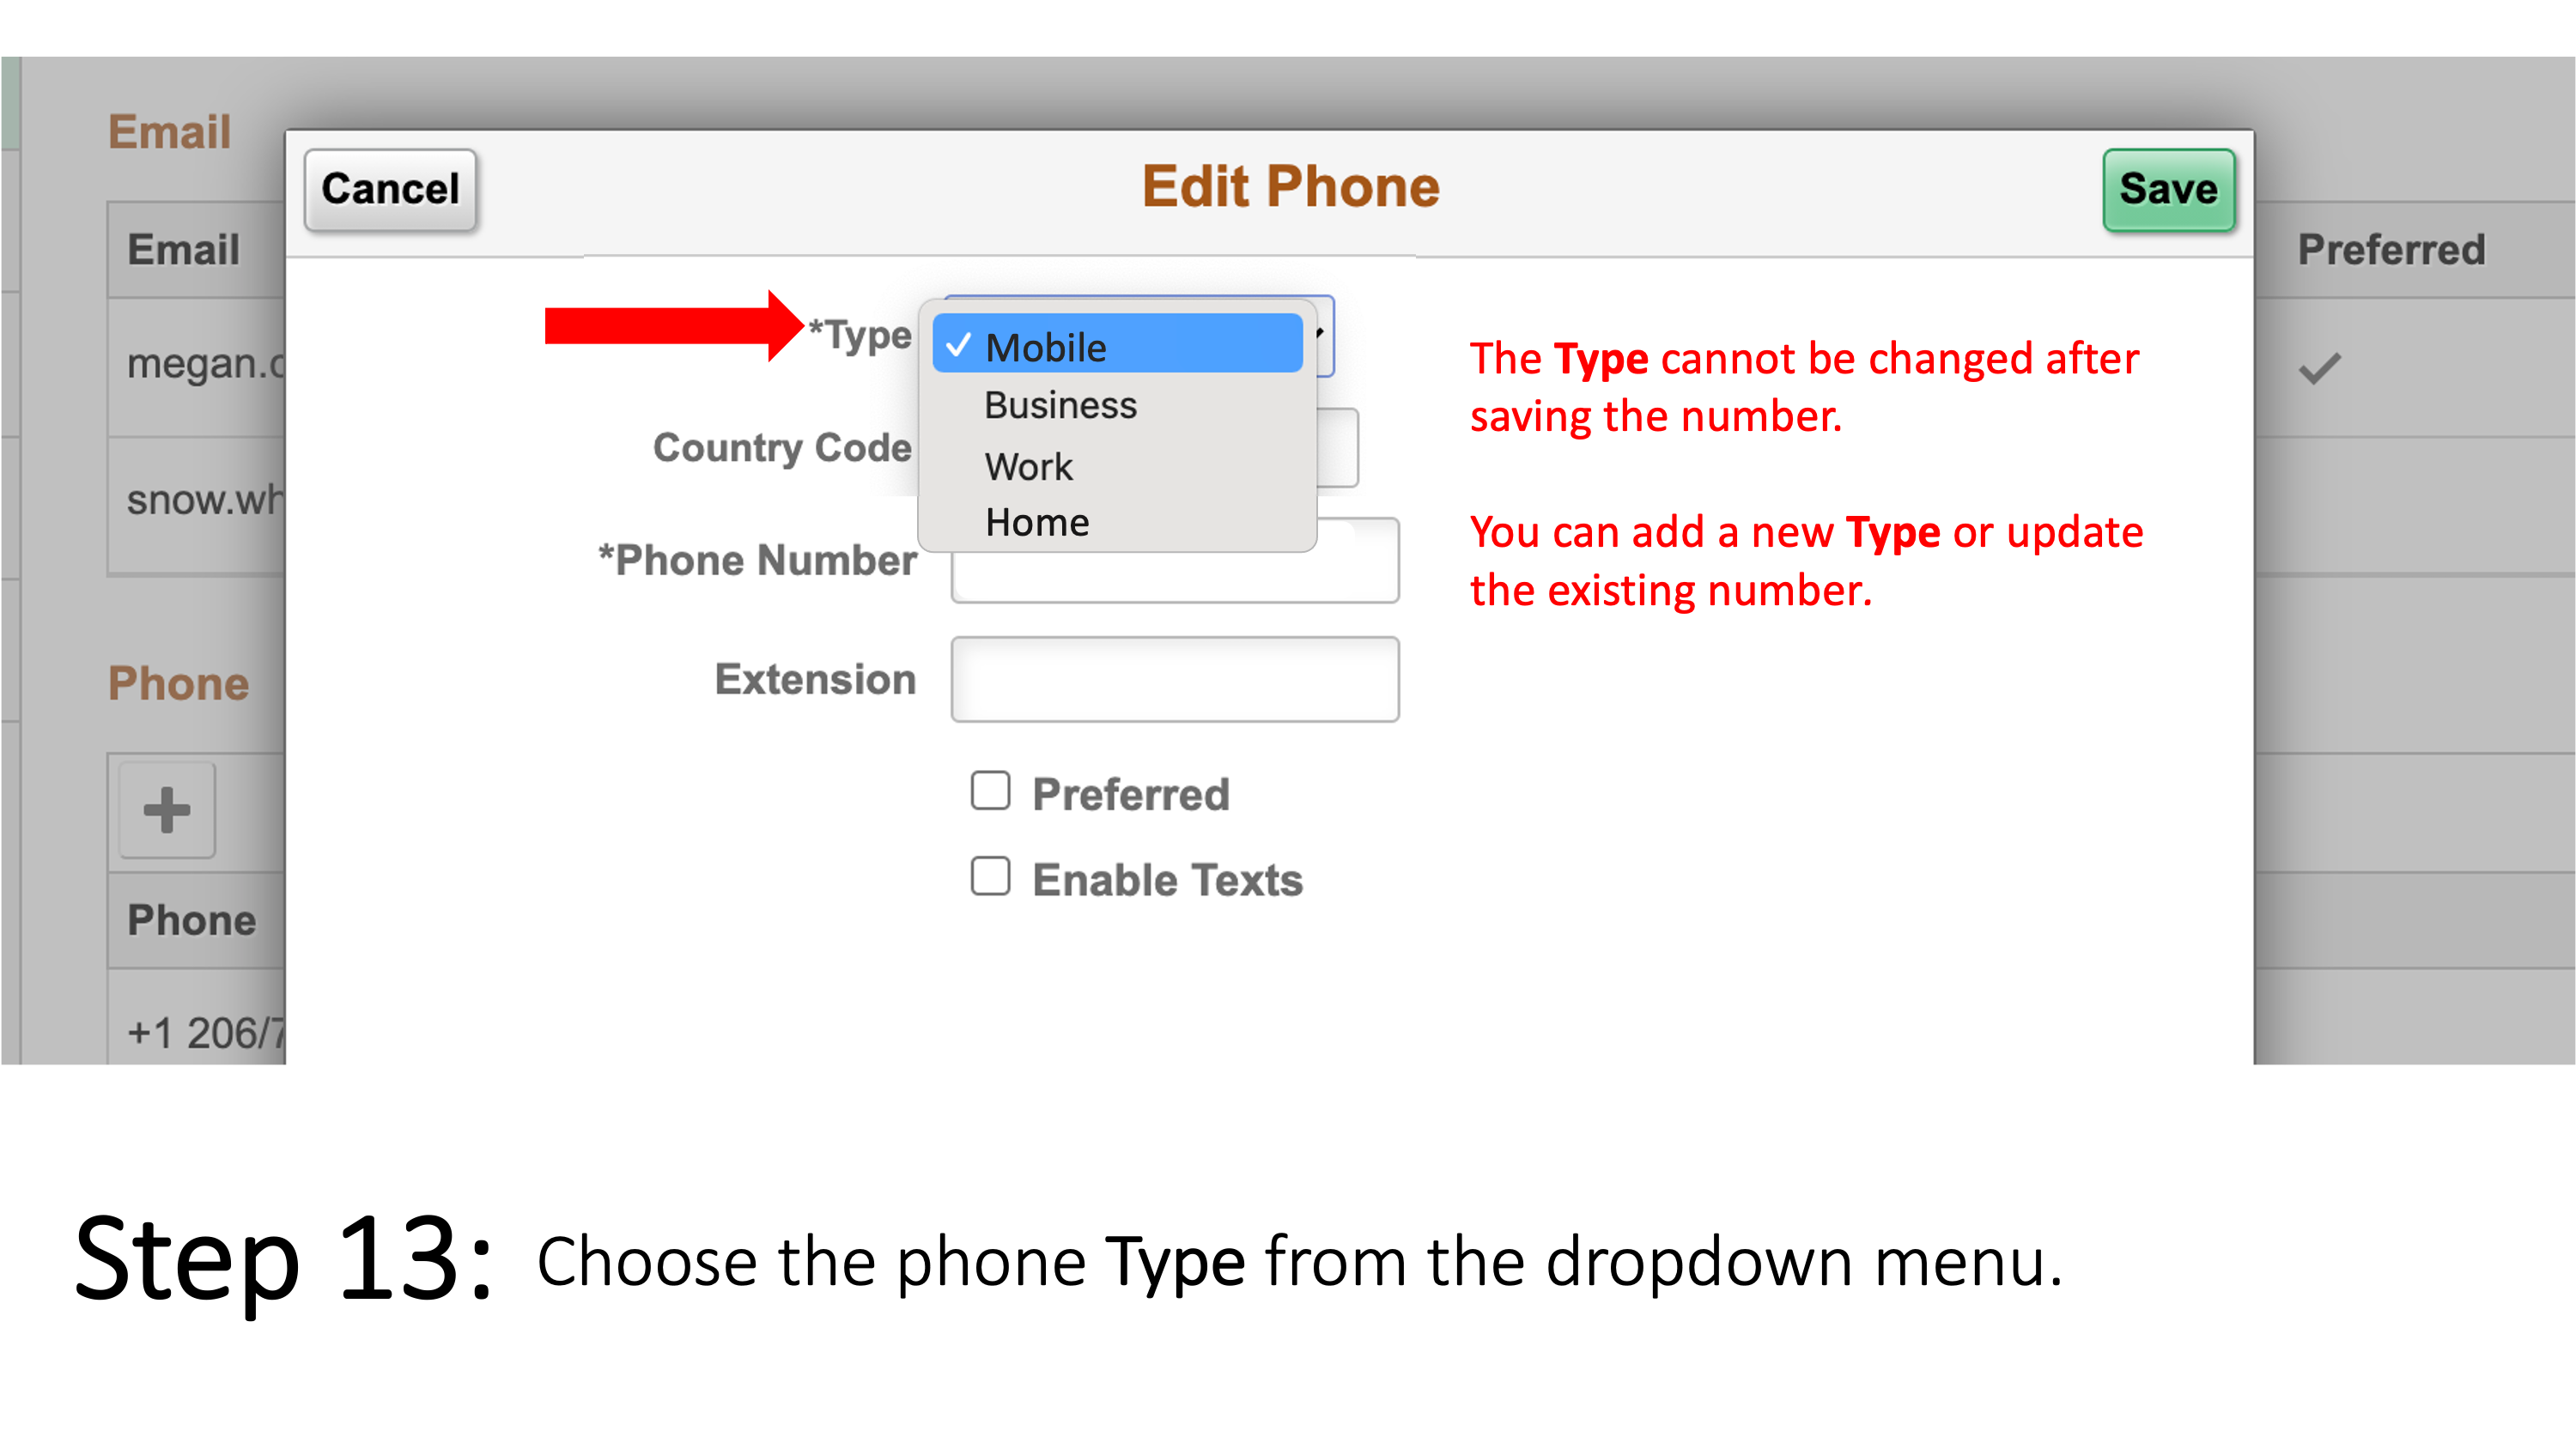 Choose the phone Type from the dropdown menu. The Type cannot be changed after saving the number. You can add a new Type or update the existing number.